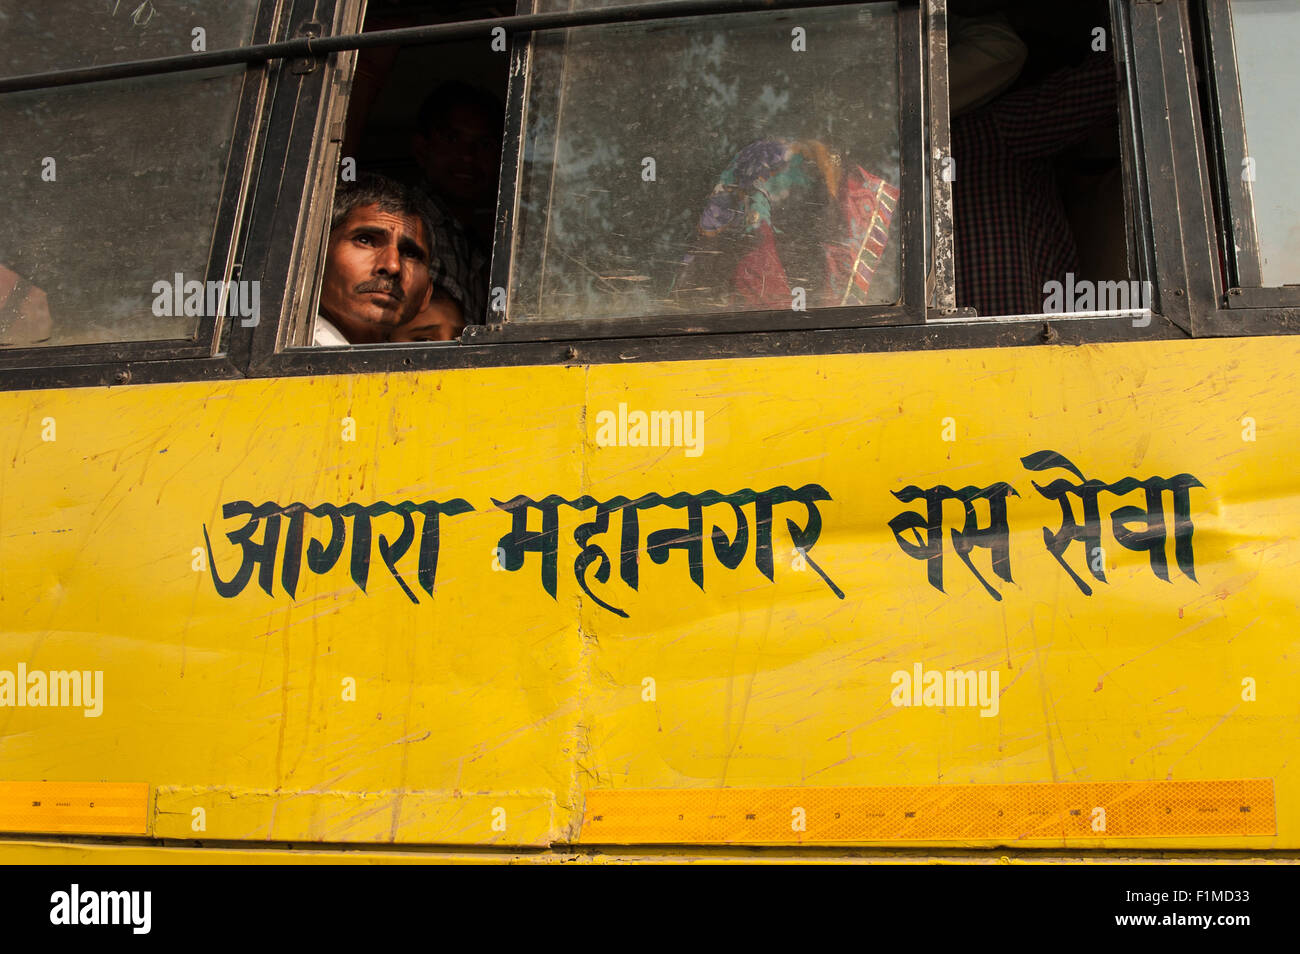 Agra, Utar Pradesh, India. People looking out of a yellow Agra bus with 'Agra Metropolitan Bus Service' written in Hindi. Stock Photo